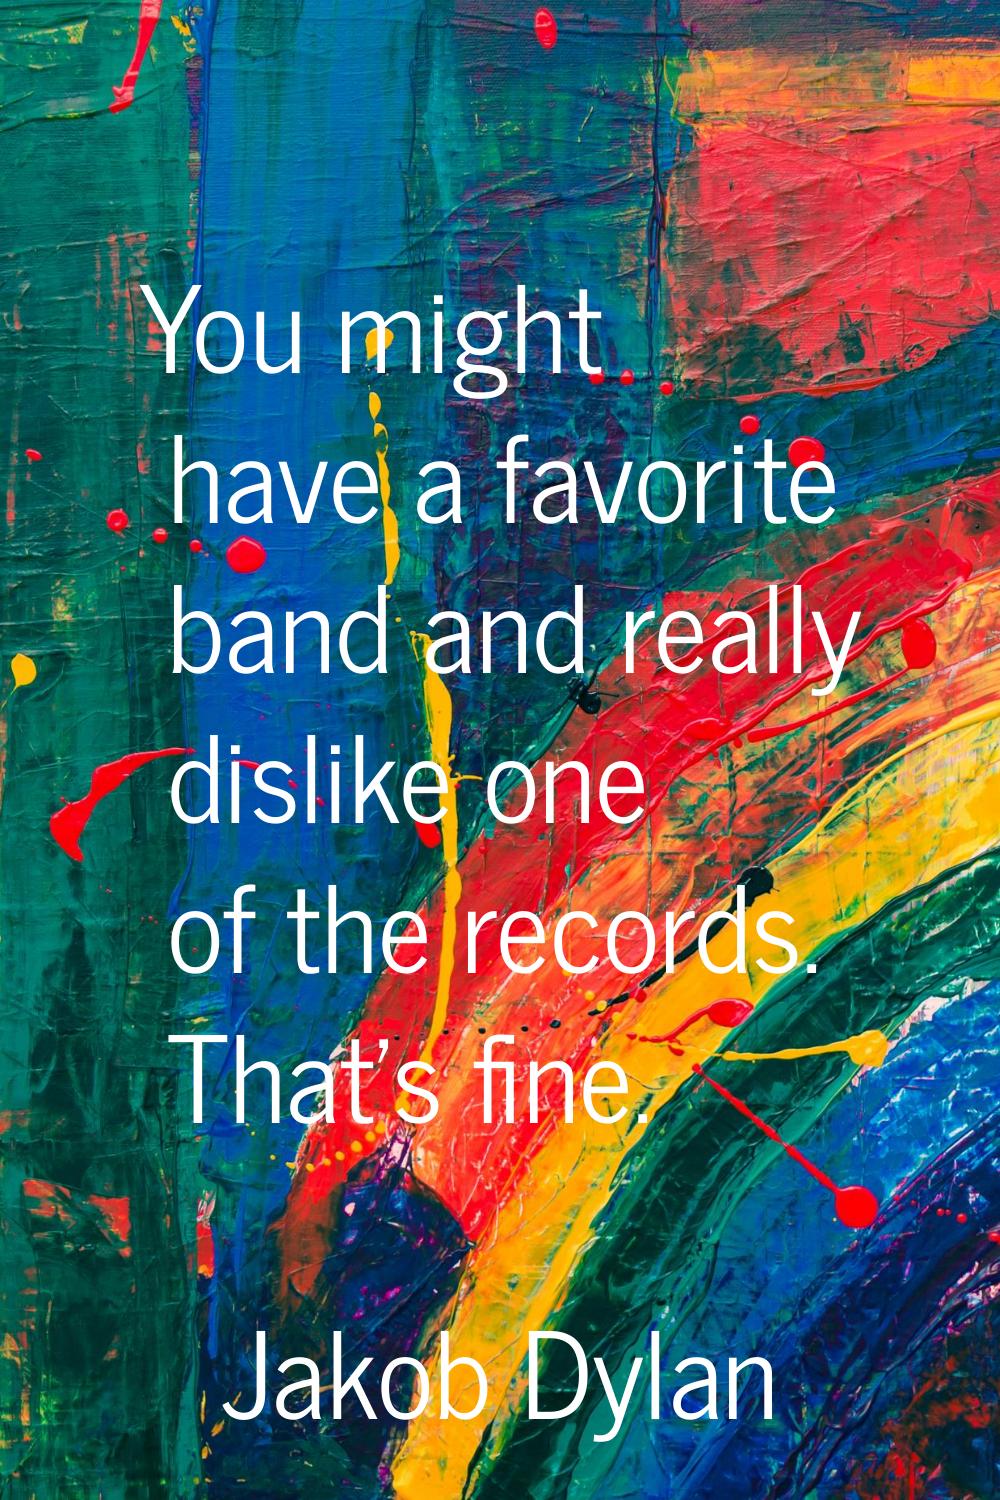 You might have a favorite band and really dislike one of the records. That's fine.